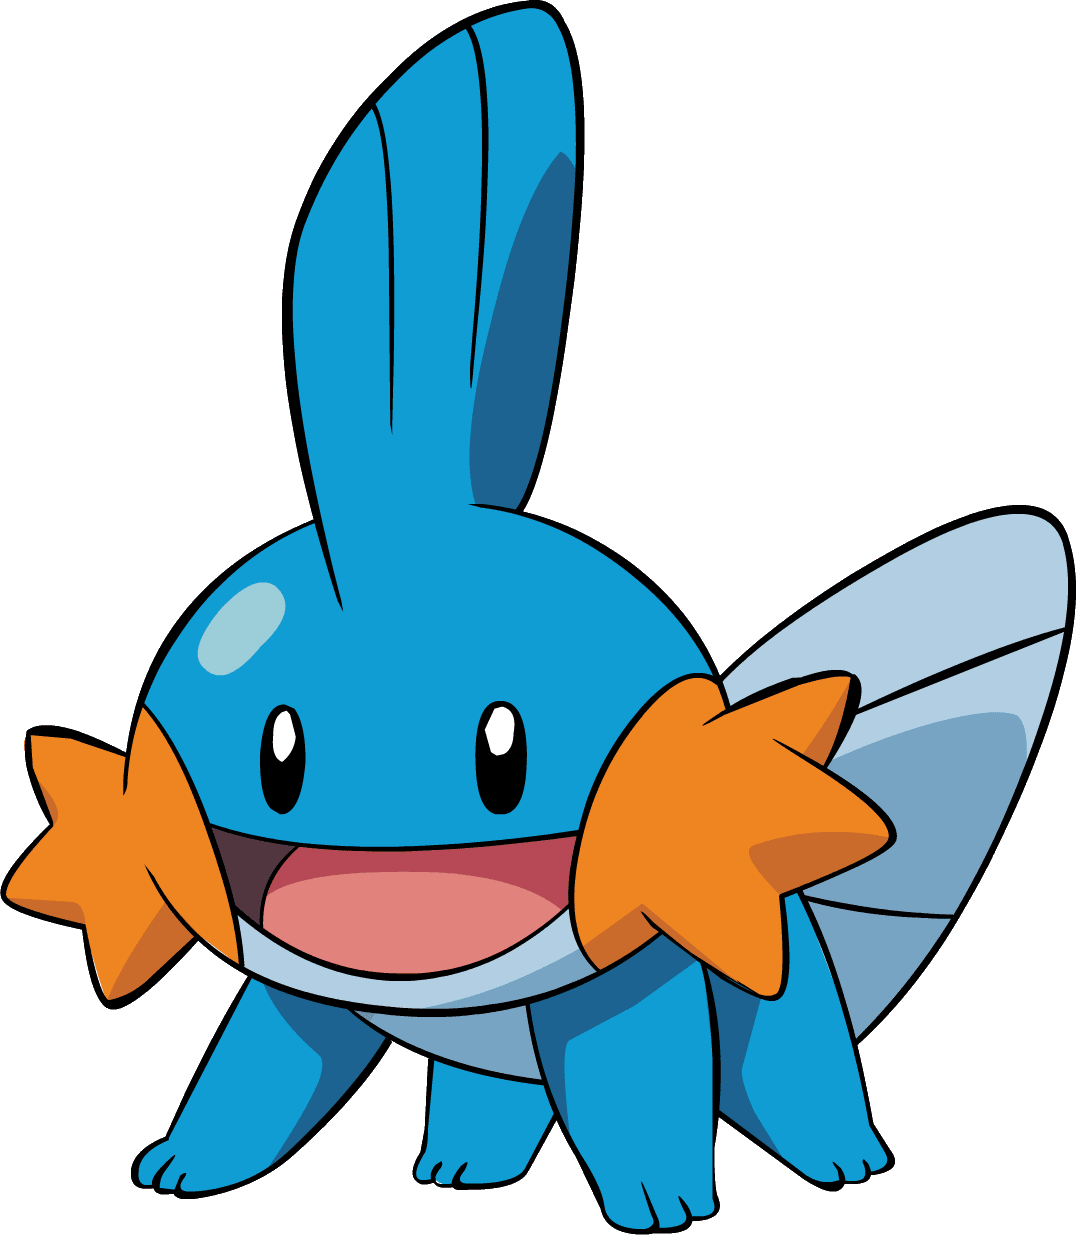 Mudkip, one of the easiest Pokemon to draw